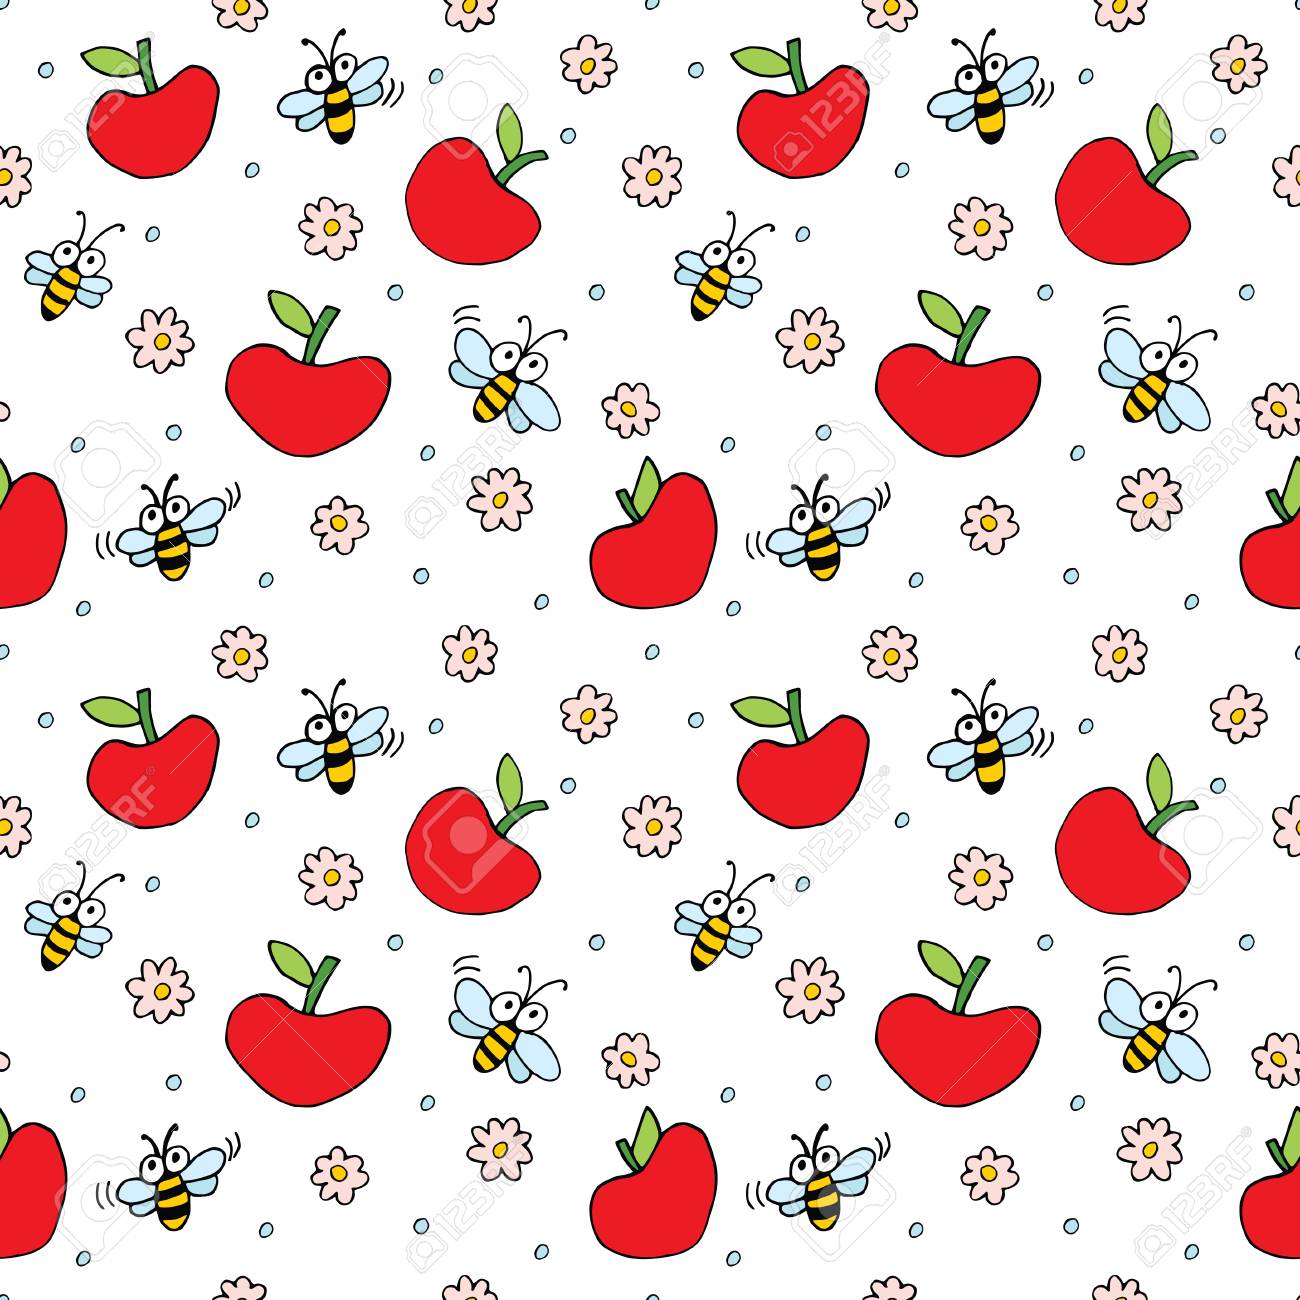 Seamless Background With Cartoon Bees Flowers And Apples Royalty